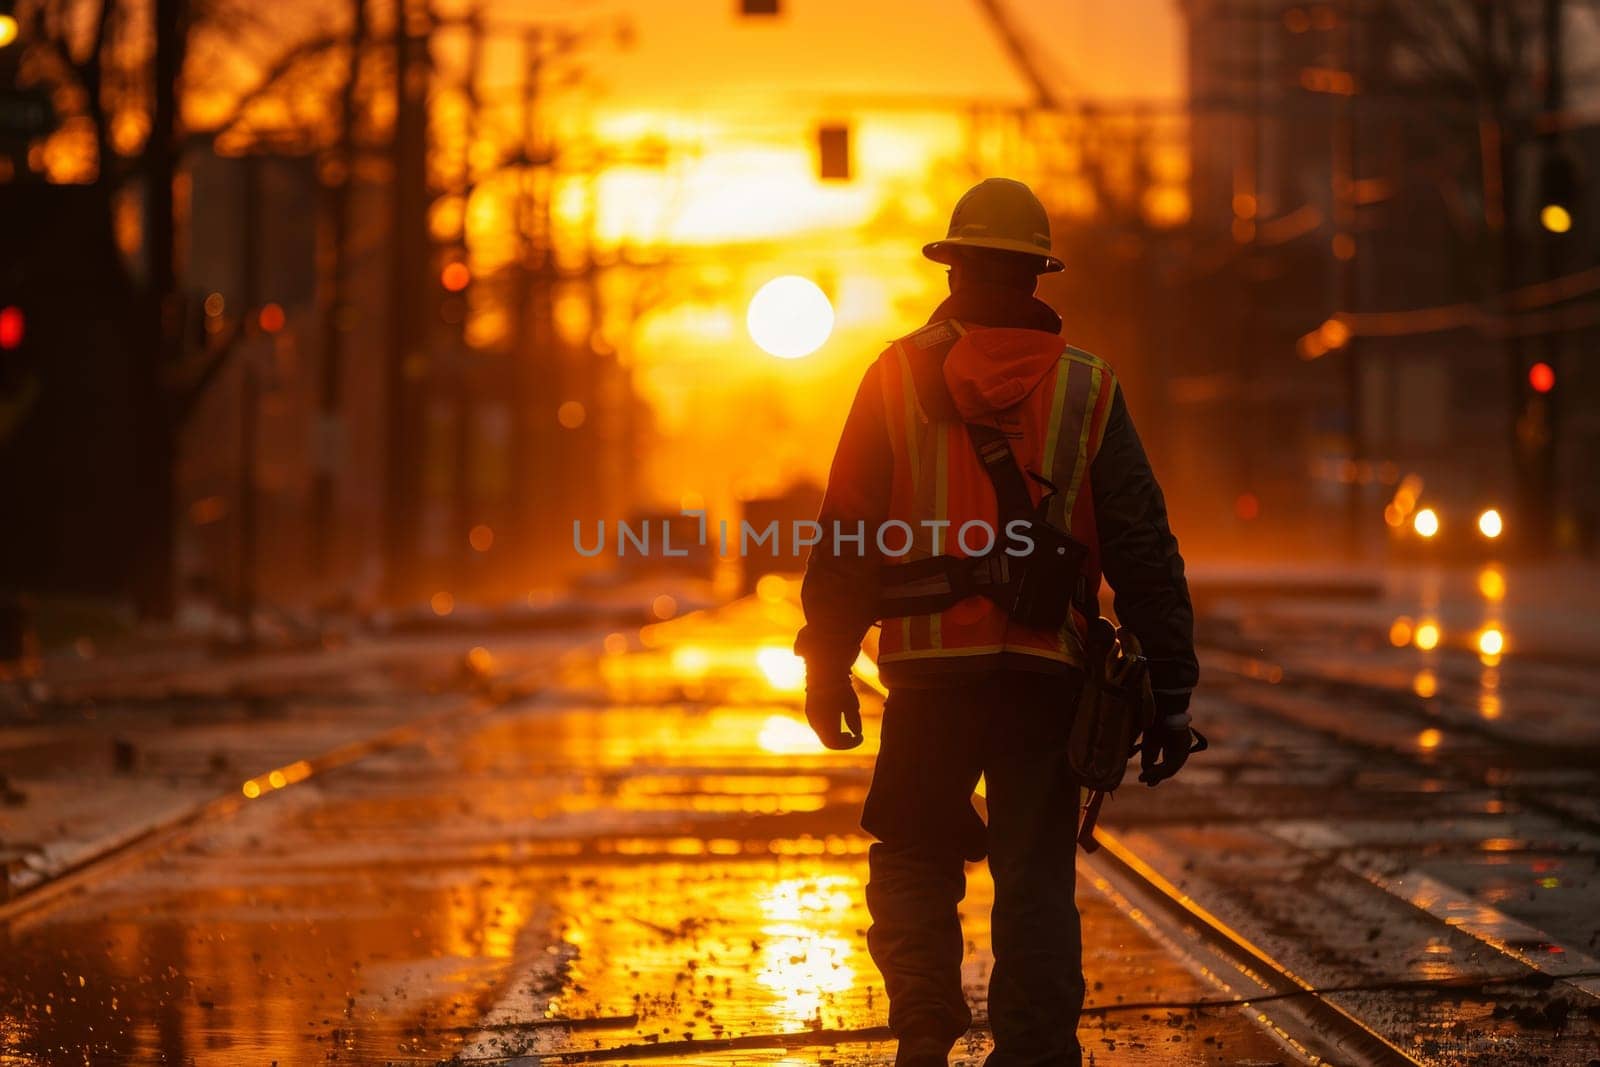 A man in a safety vest walks down a street at sunset. The scene is quiet and peaceful, with the man being the only person visible